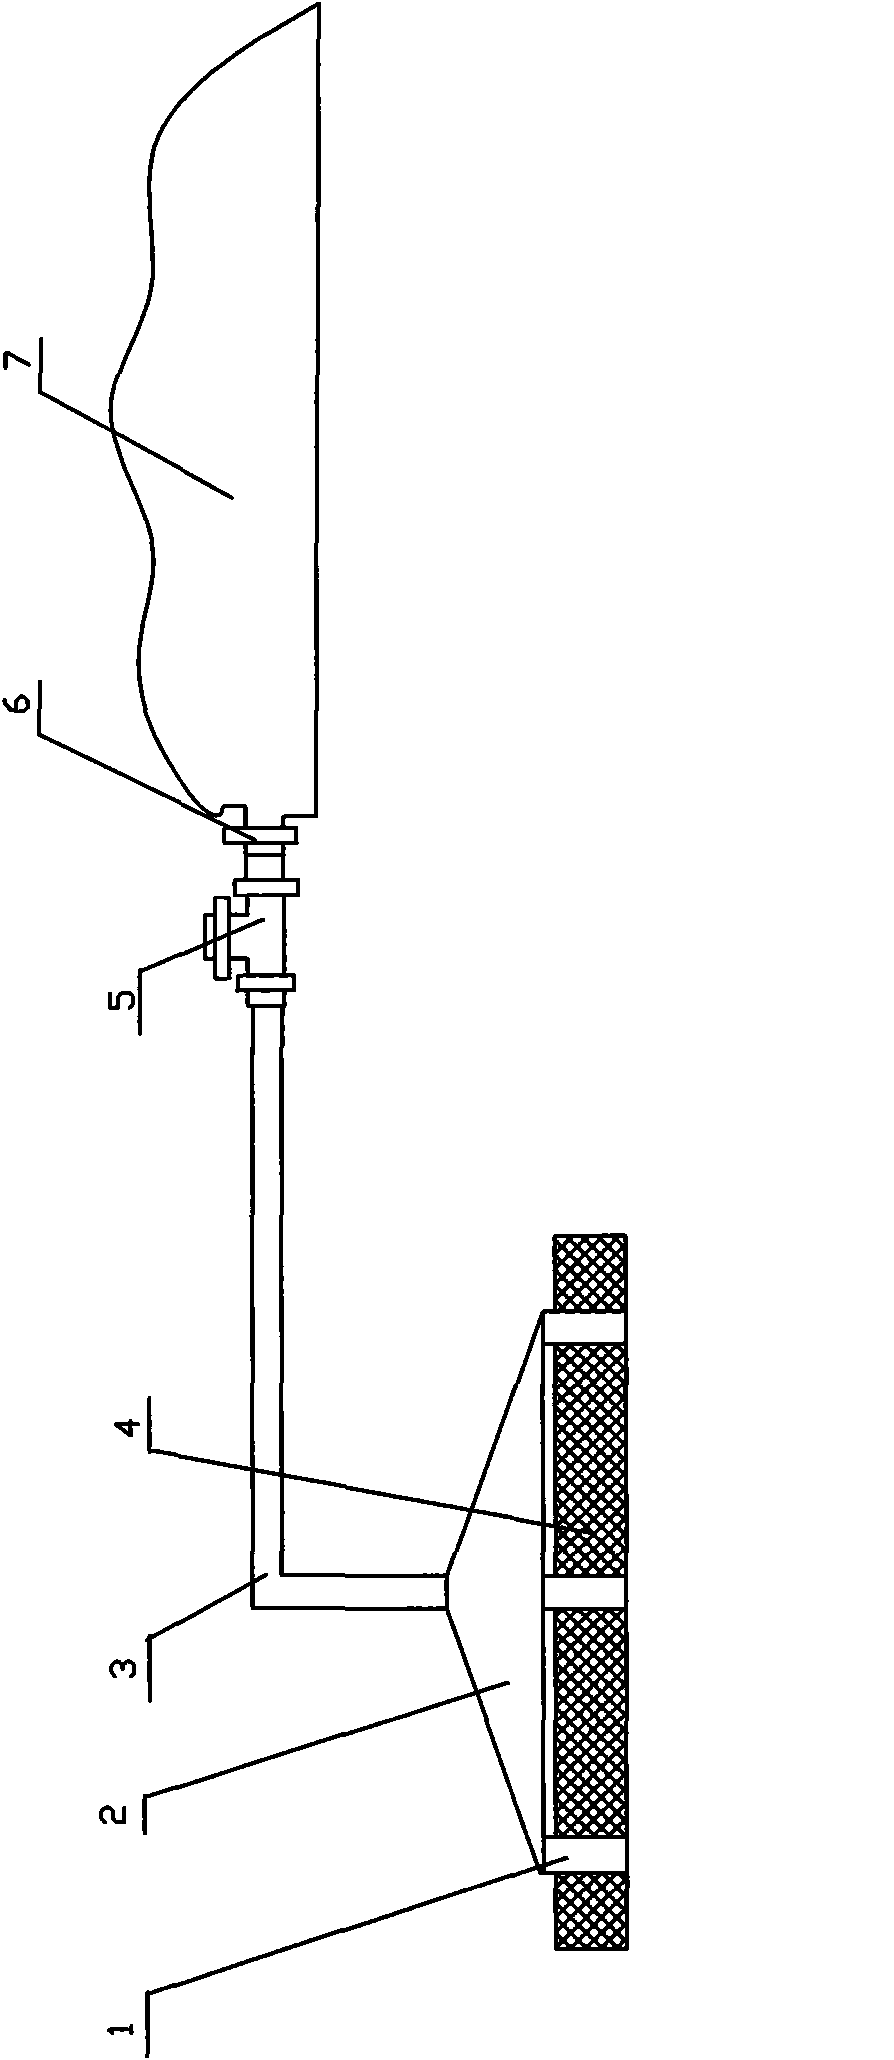 Oxygen collecting device